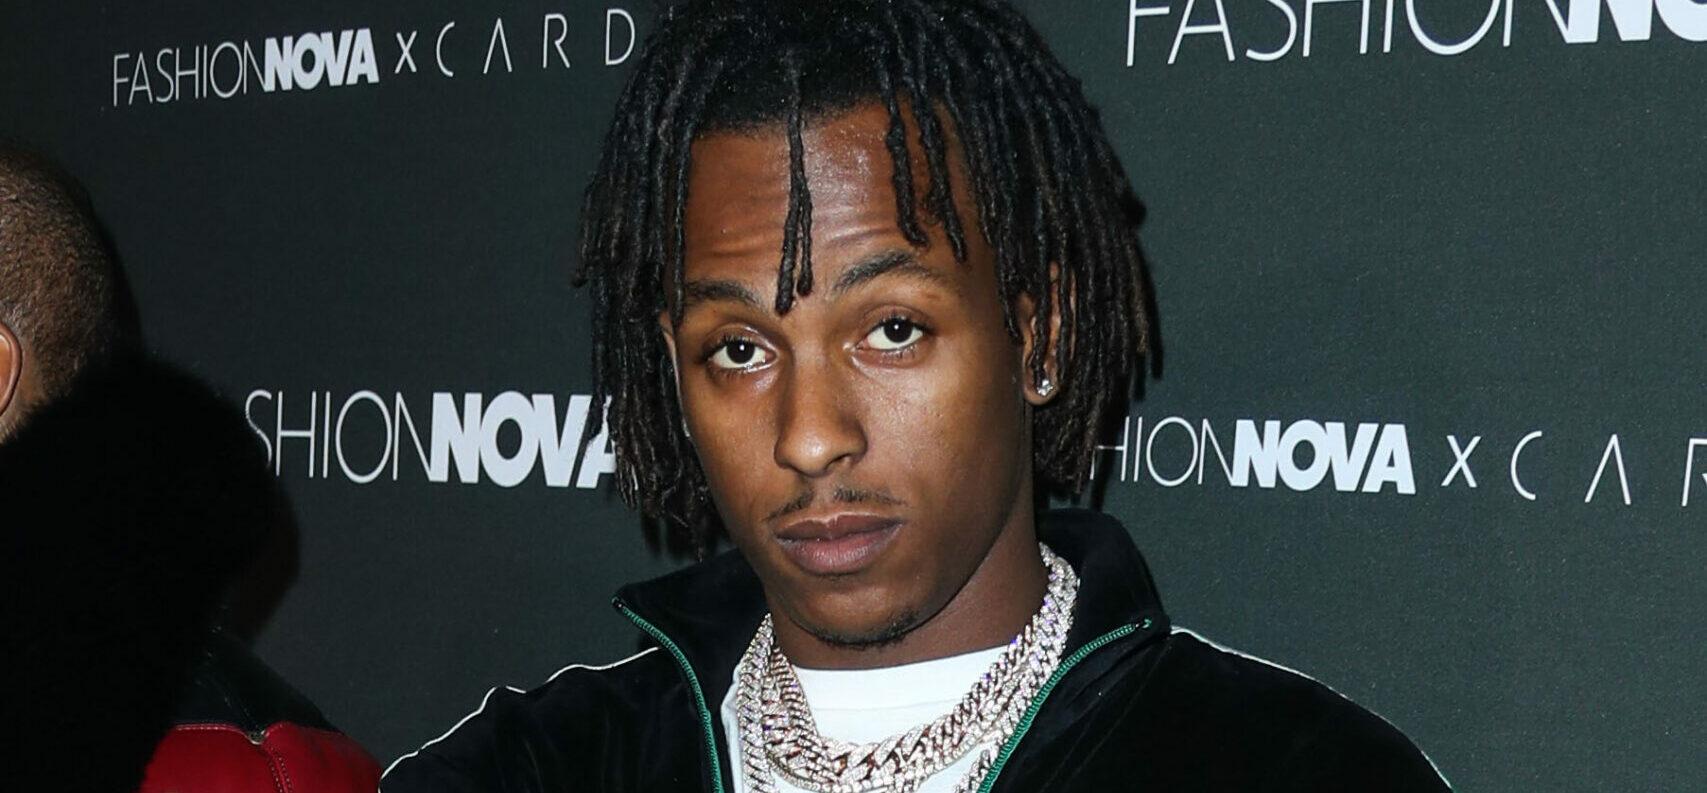 Rich the Kid Ordered To Pay Fashion Nova Over $130,000 In Contract Dispute